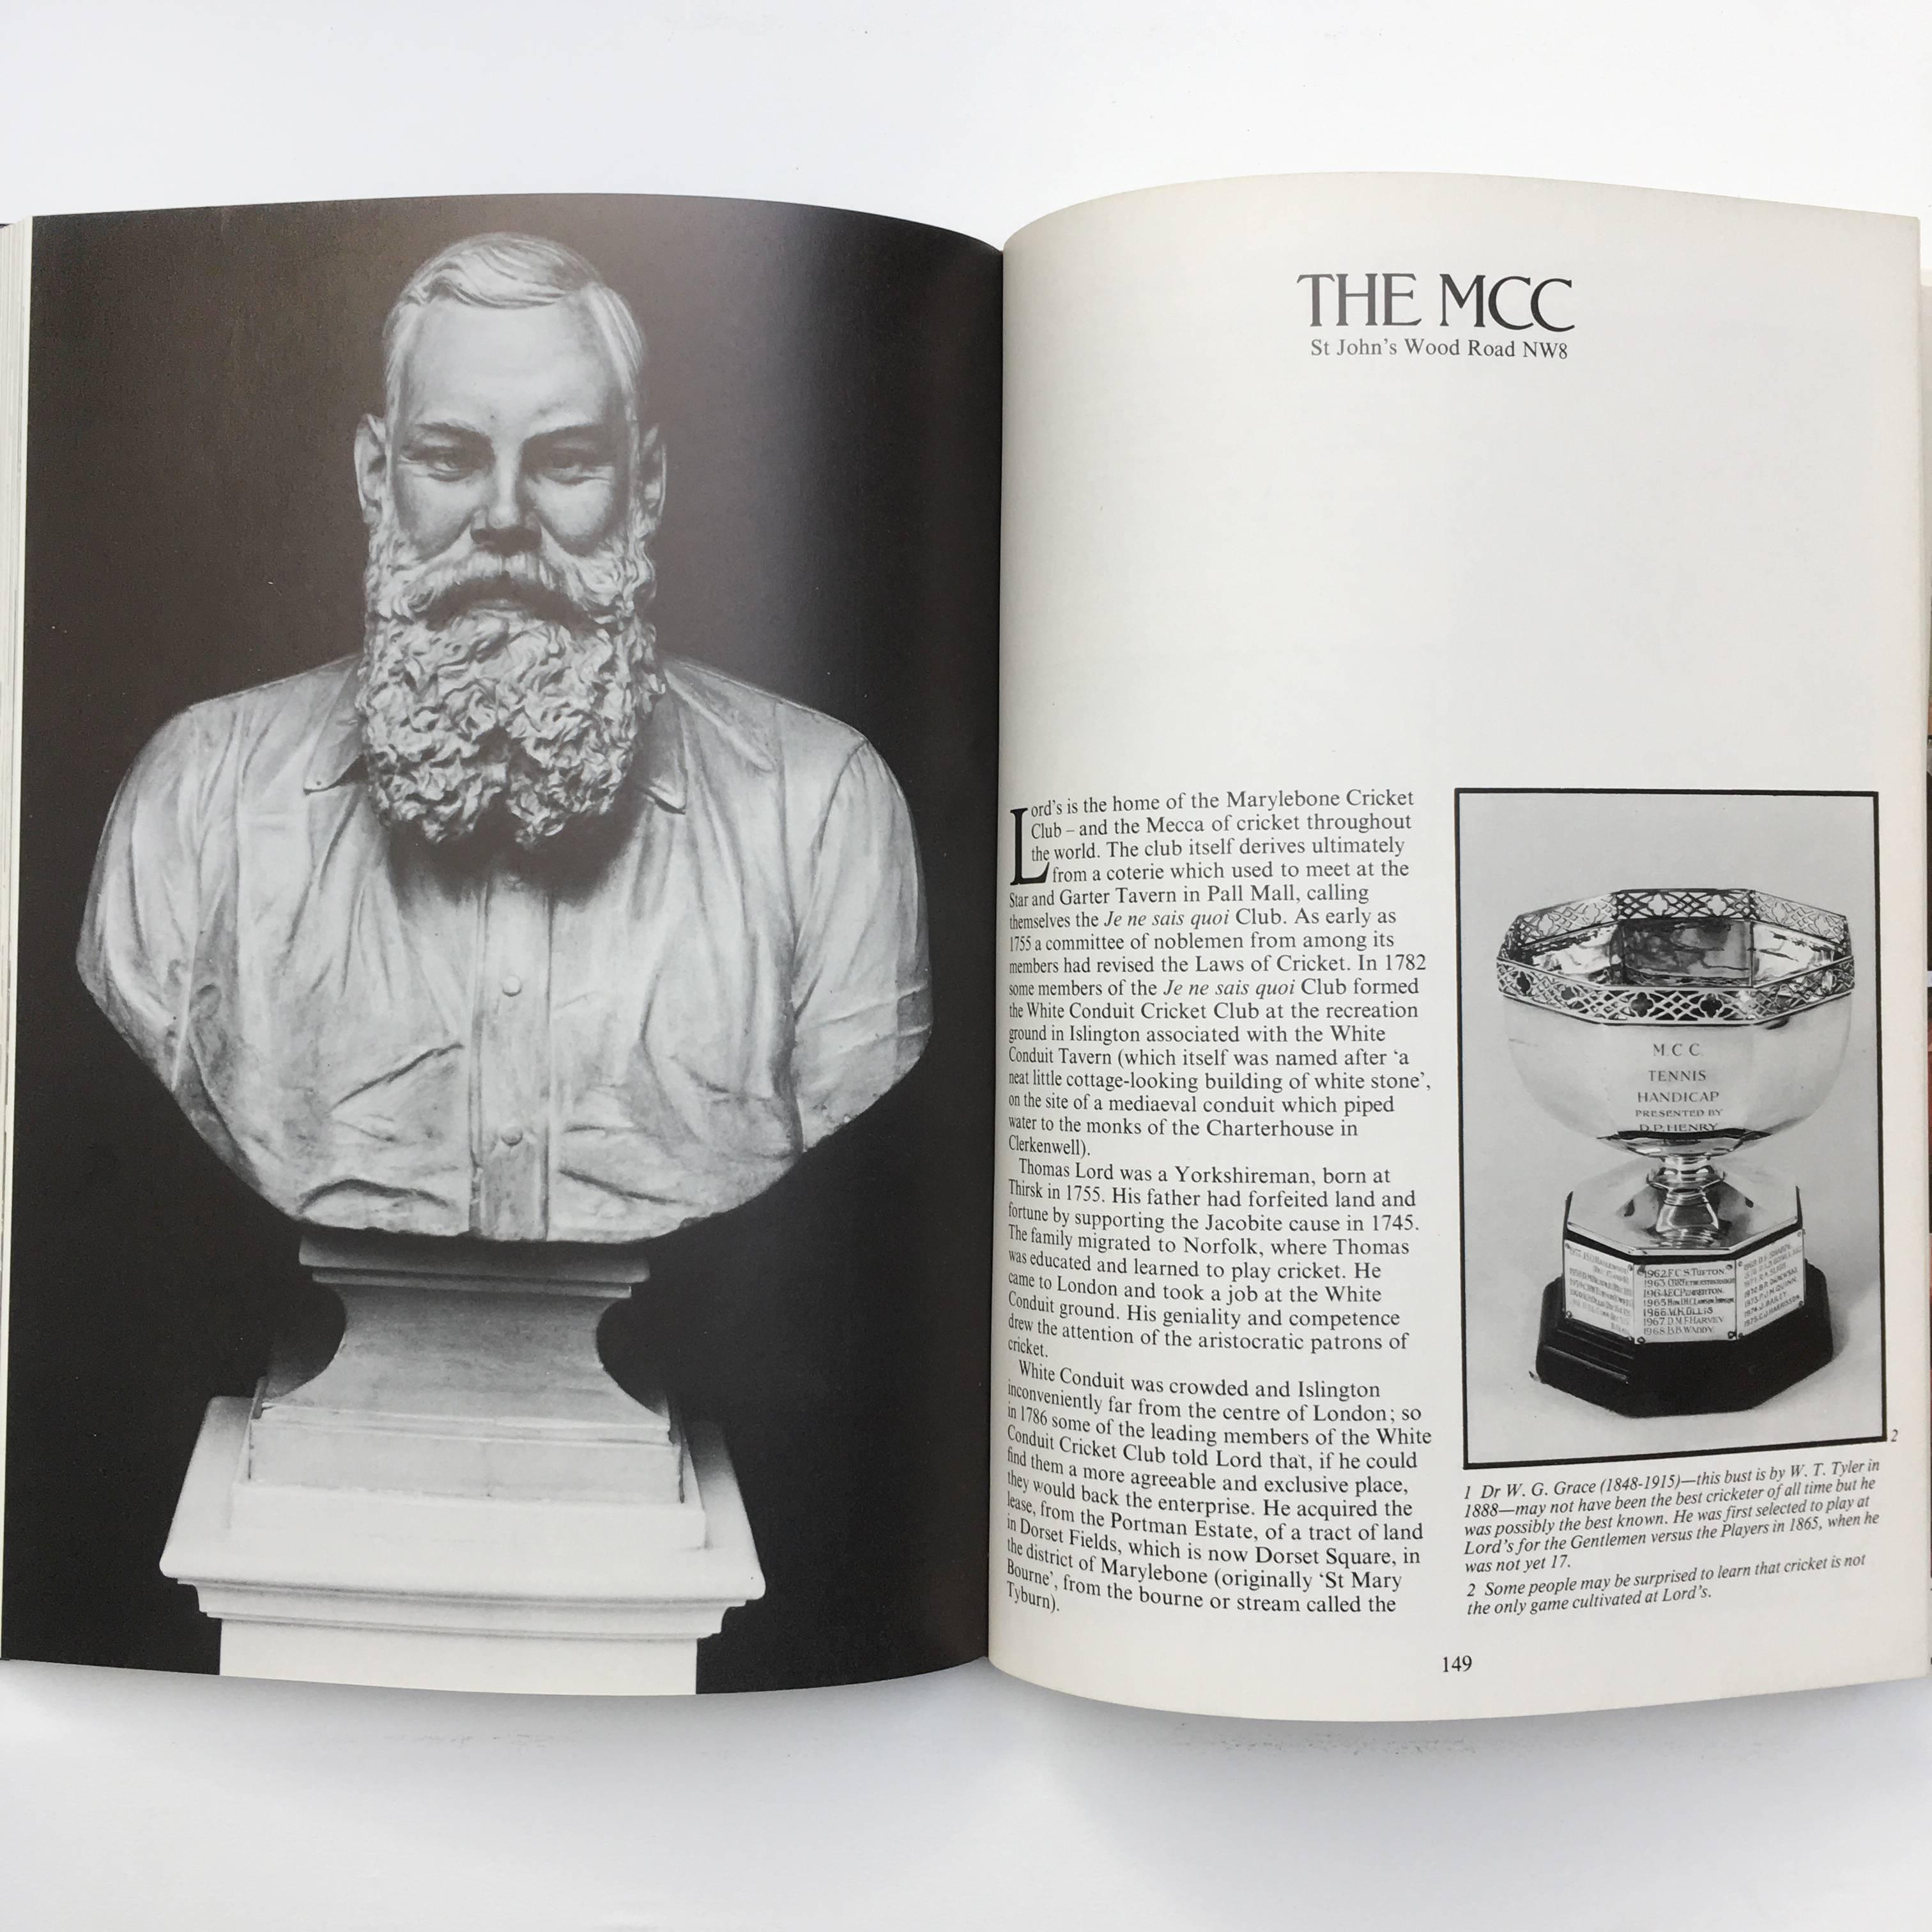 Published by Bracken Books, 1984

Peer in to the grand interiors and daily routines of the rich and elite with this incredible collection of photographs and stories behind the many antiquated gentlemen’s clubs of London. ‘The Gentleman’s Clubs of